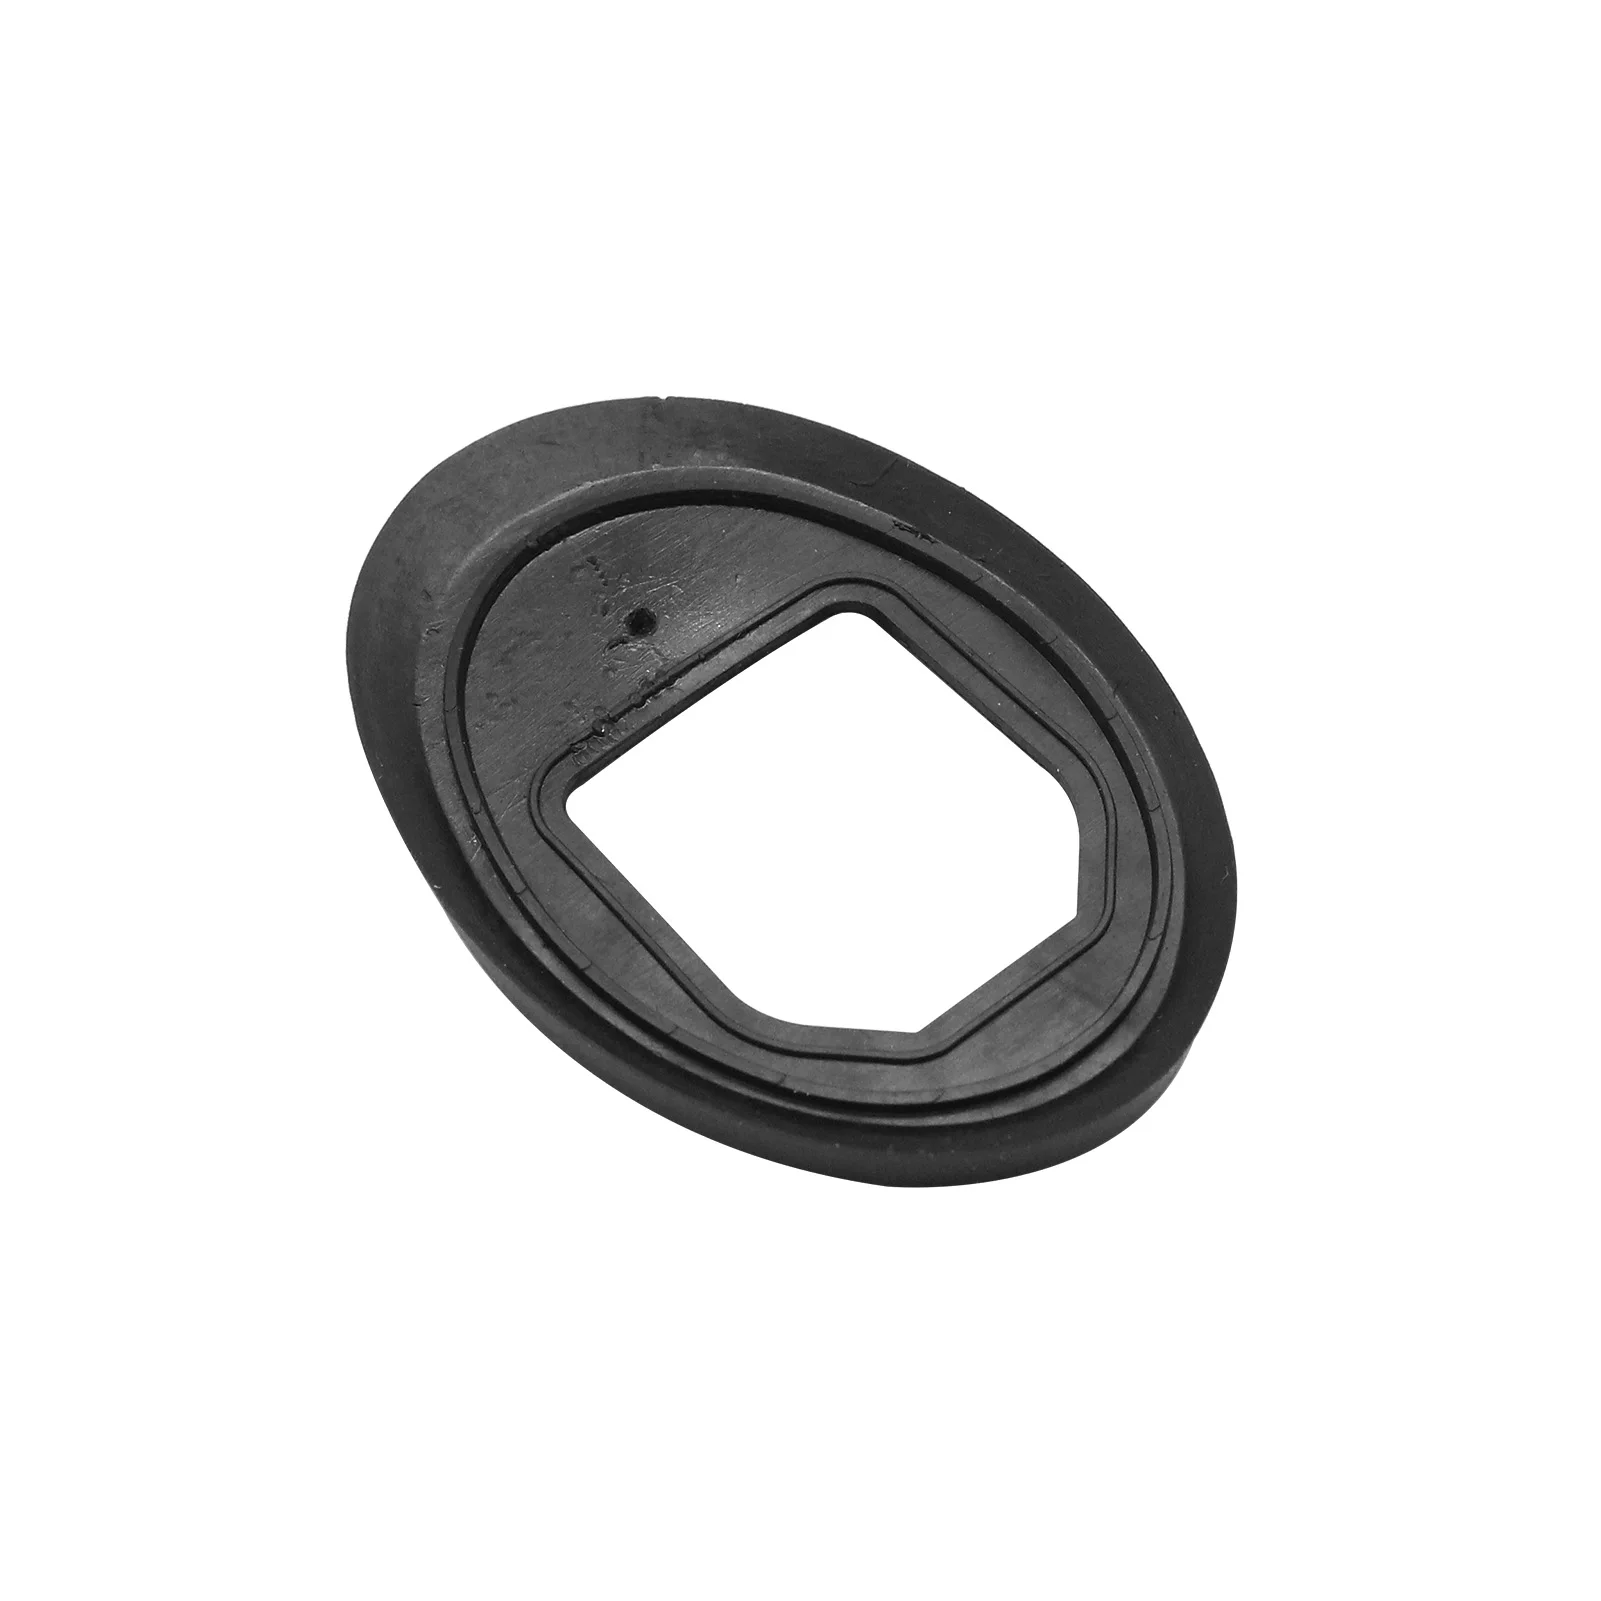 Rubber Gasket Seal Car Goods Roof Antenna Base Gasket Replacement for VW Beetle Golf Jetta Passat CONT01